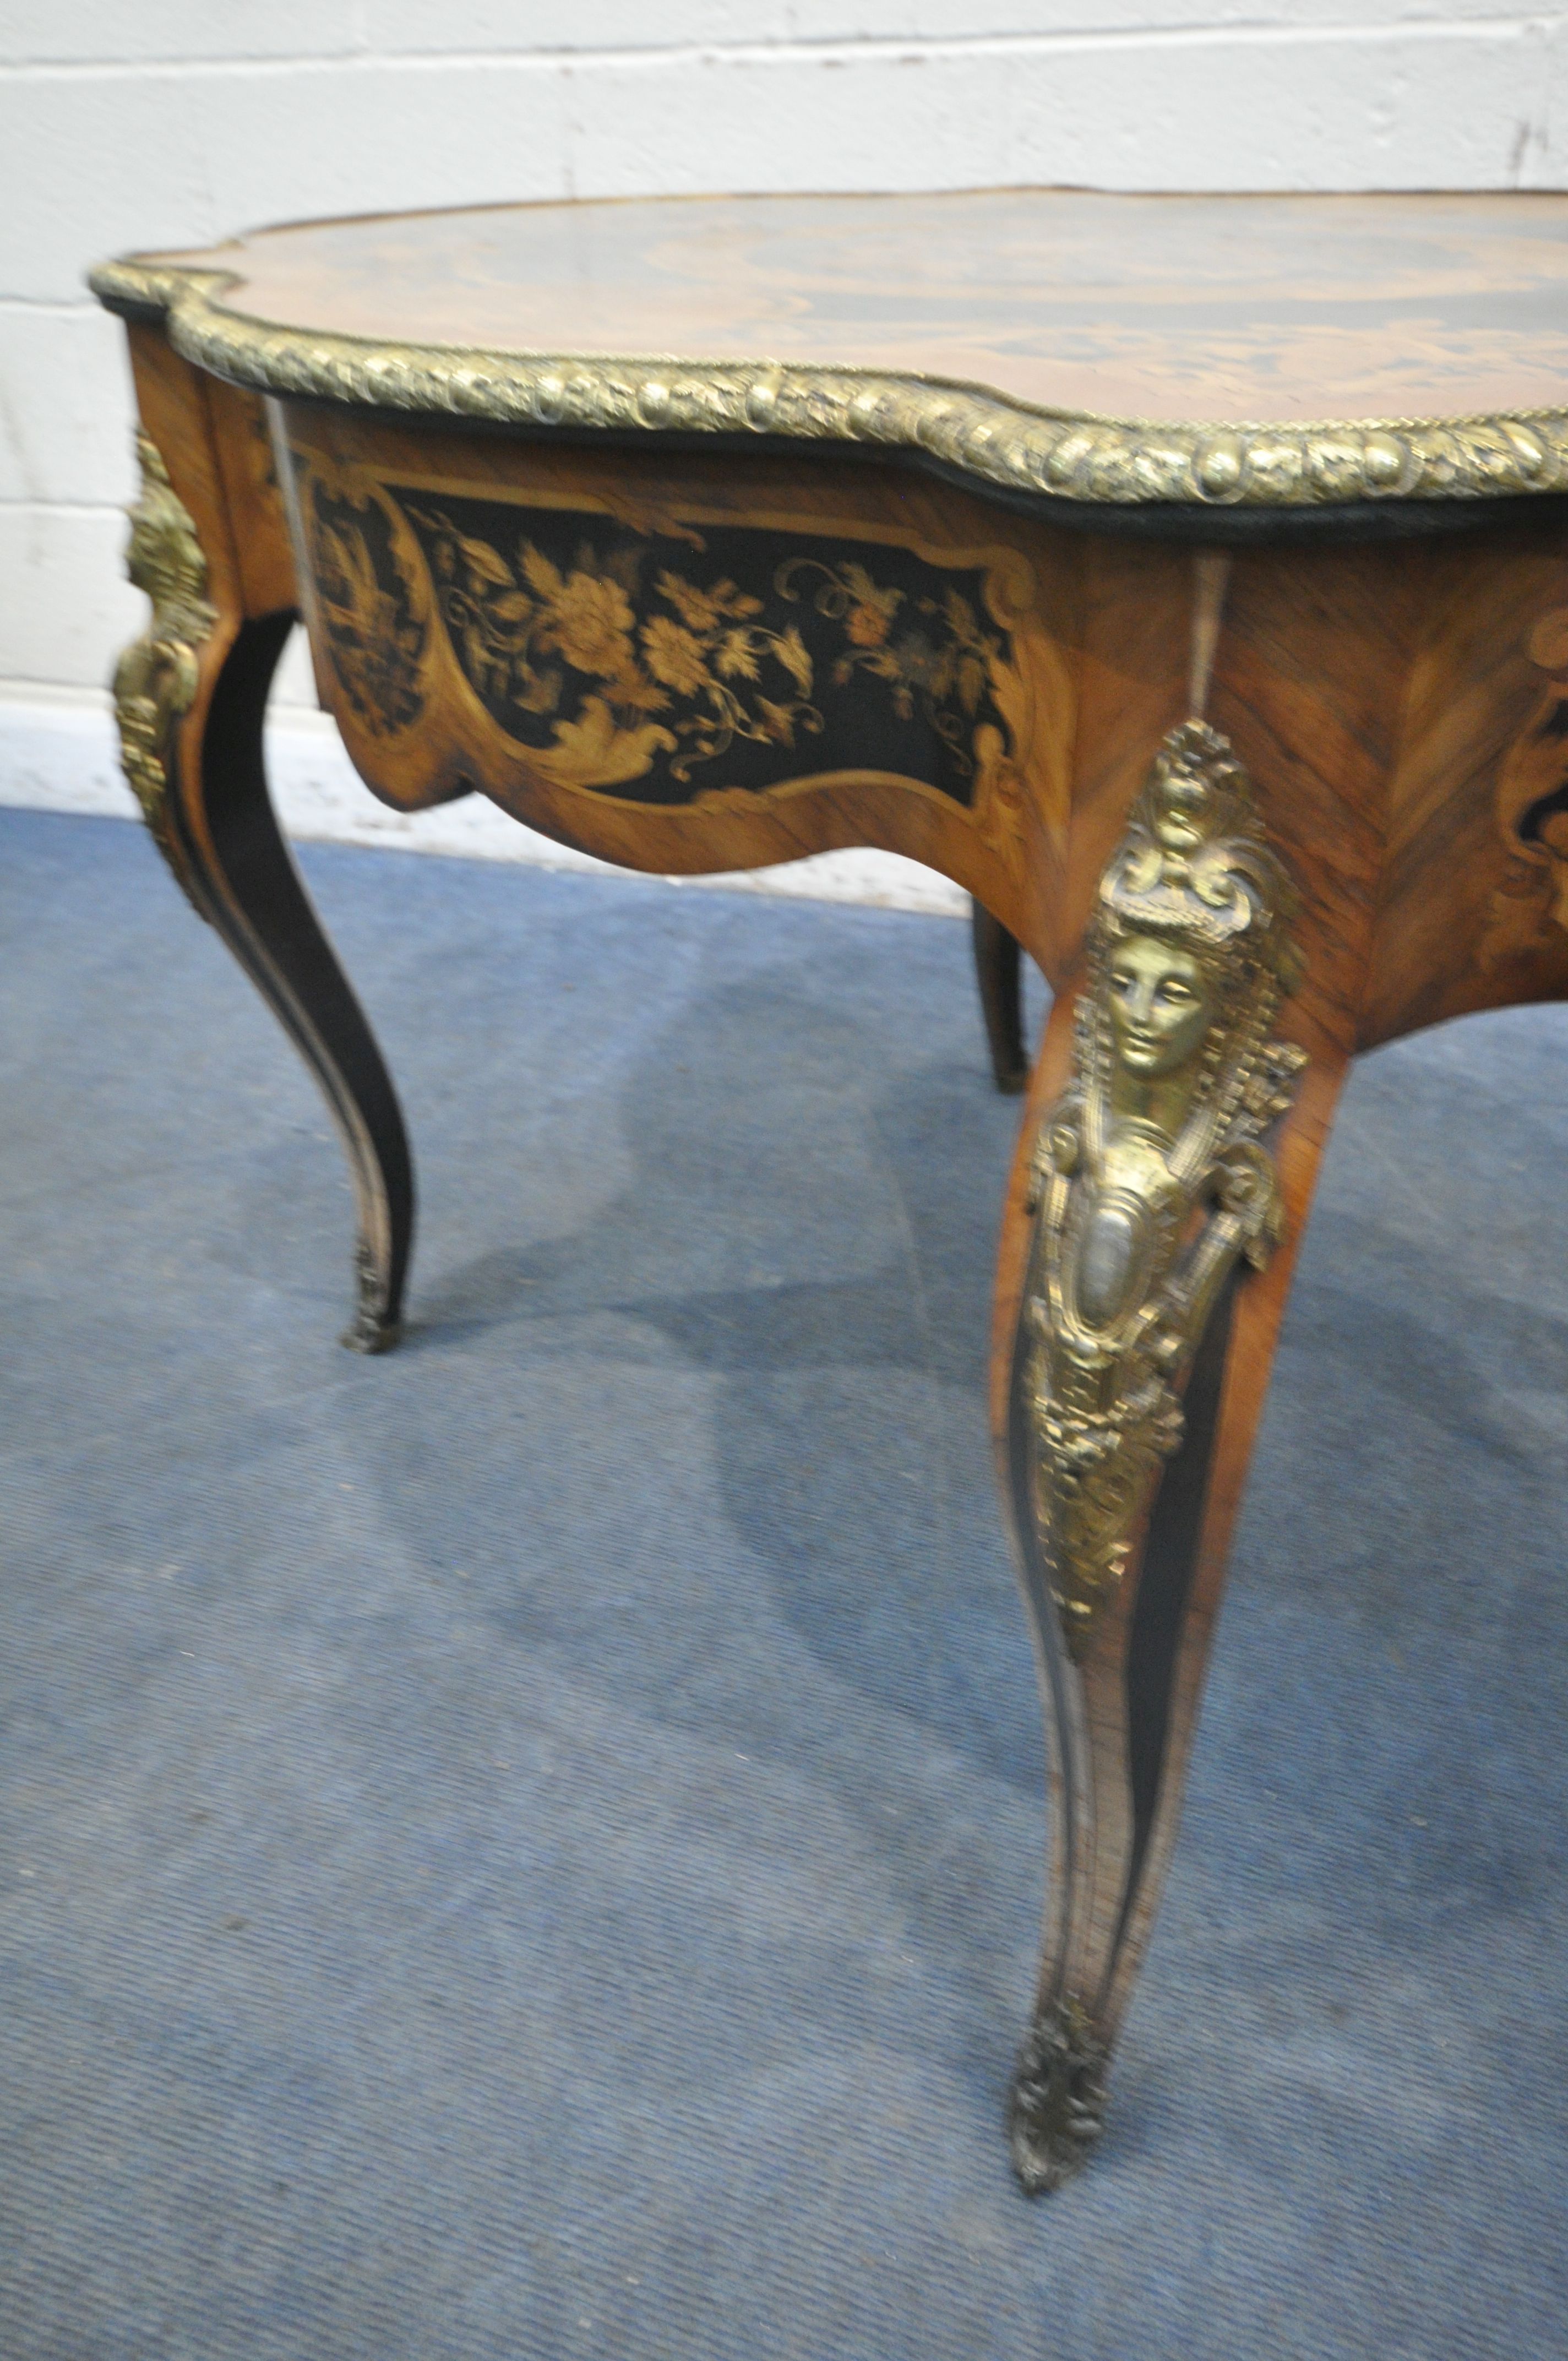 A LOUIS XVI STYLE KINGWOOD, EBONY AND MARQUETRY INLAID CENTRE TABLE, late 19th century, the and - Image 5 of 9